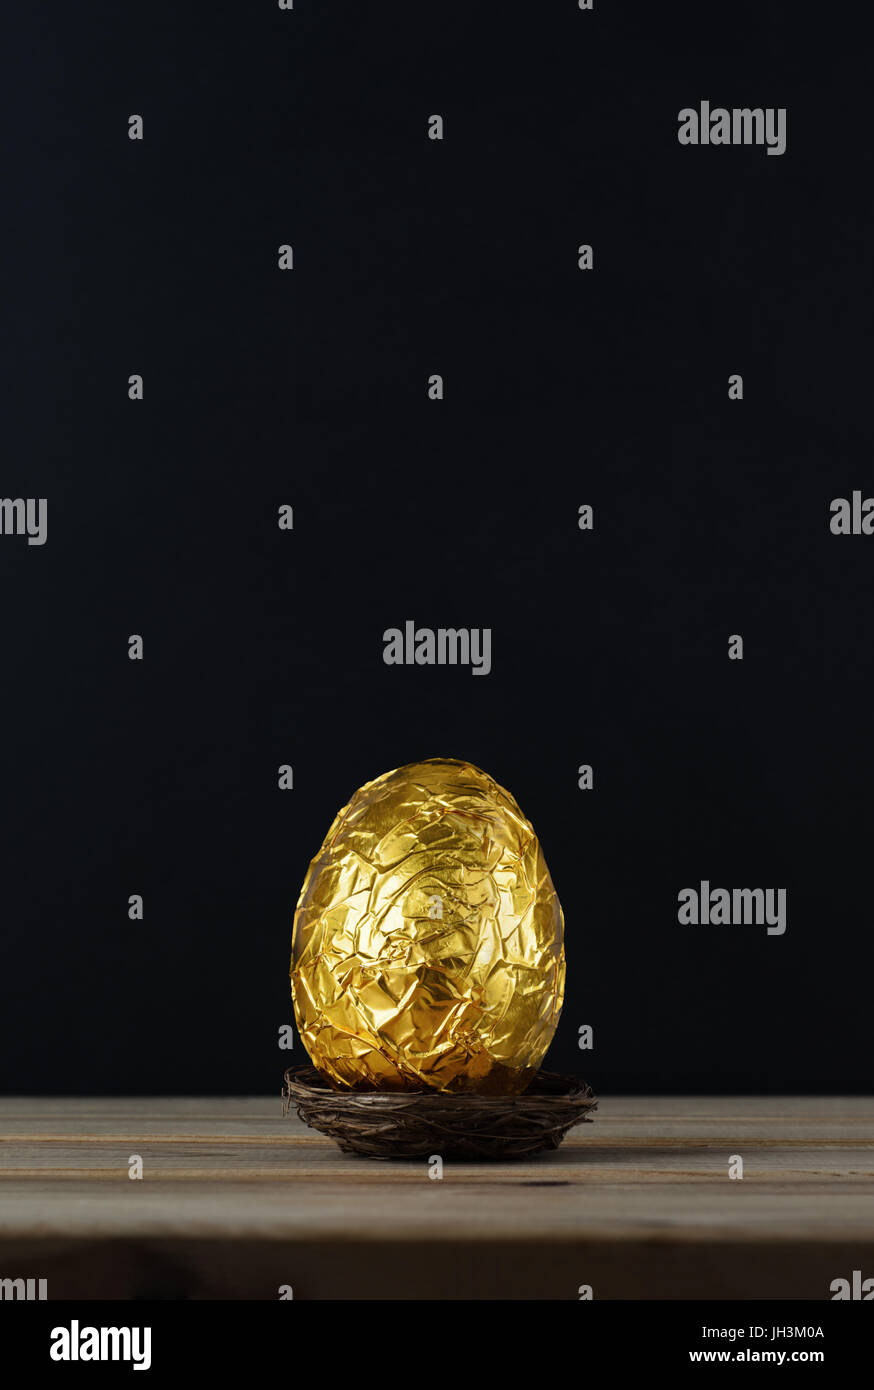 Easter concept.  A chocolate egg, wrapped in crinkled metallic gold foil.  Presented in a small nest on a wood plank table with black chalkboard backg Stock Photo